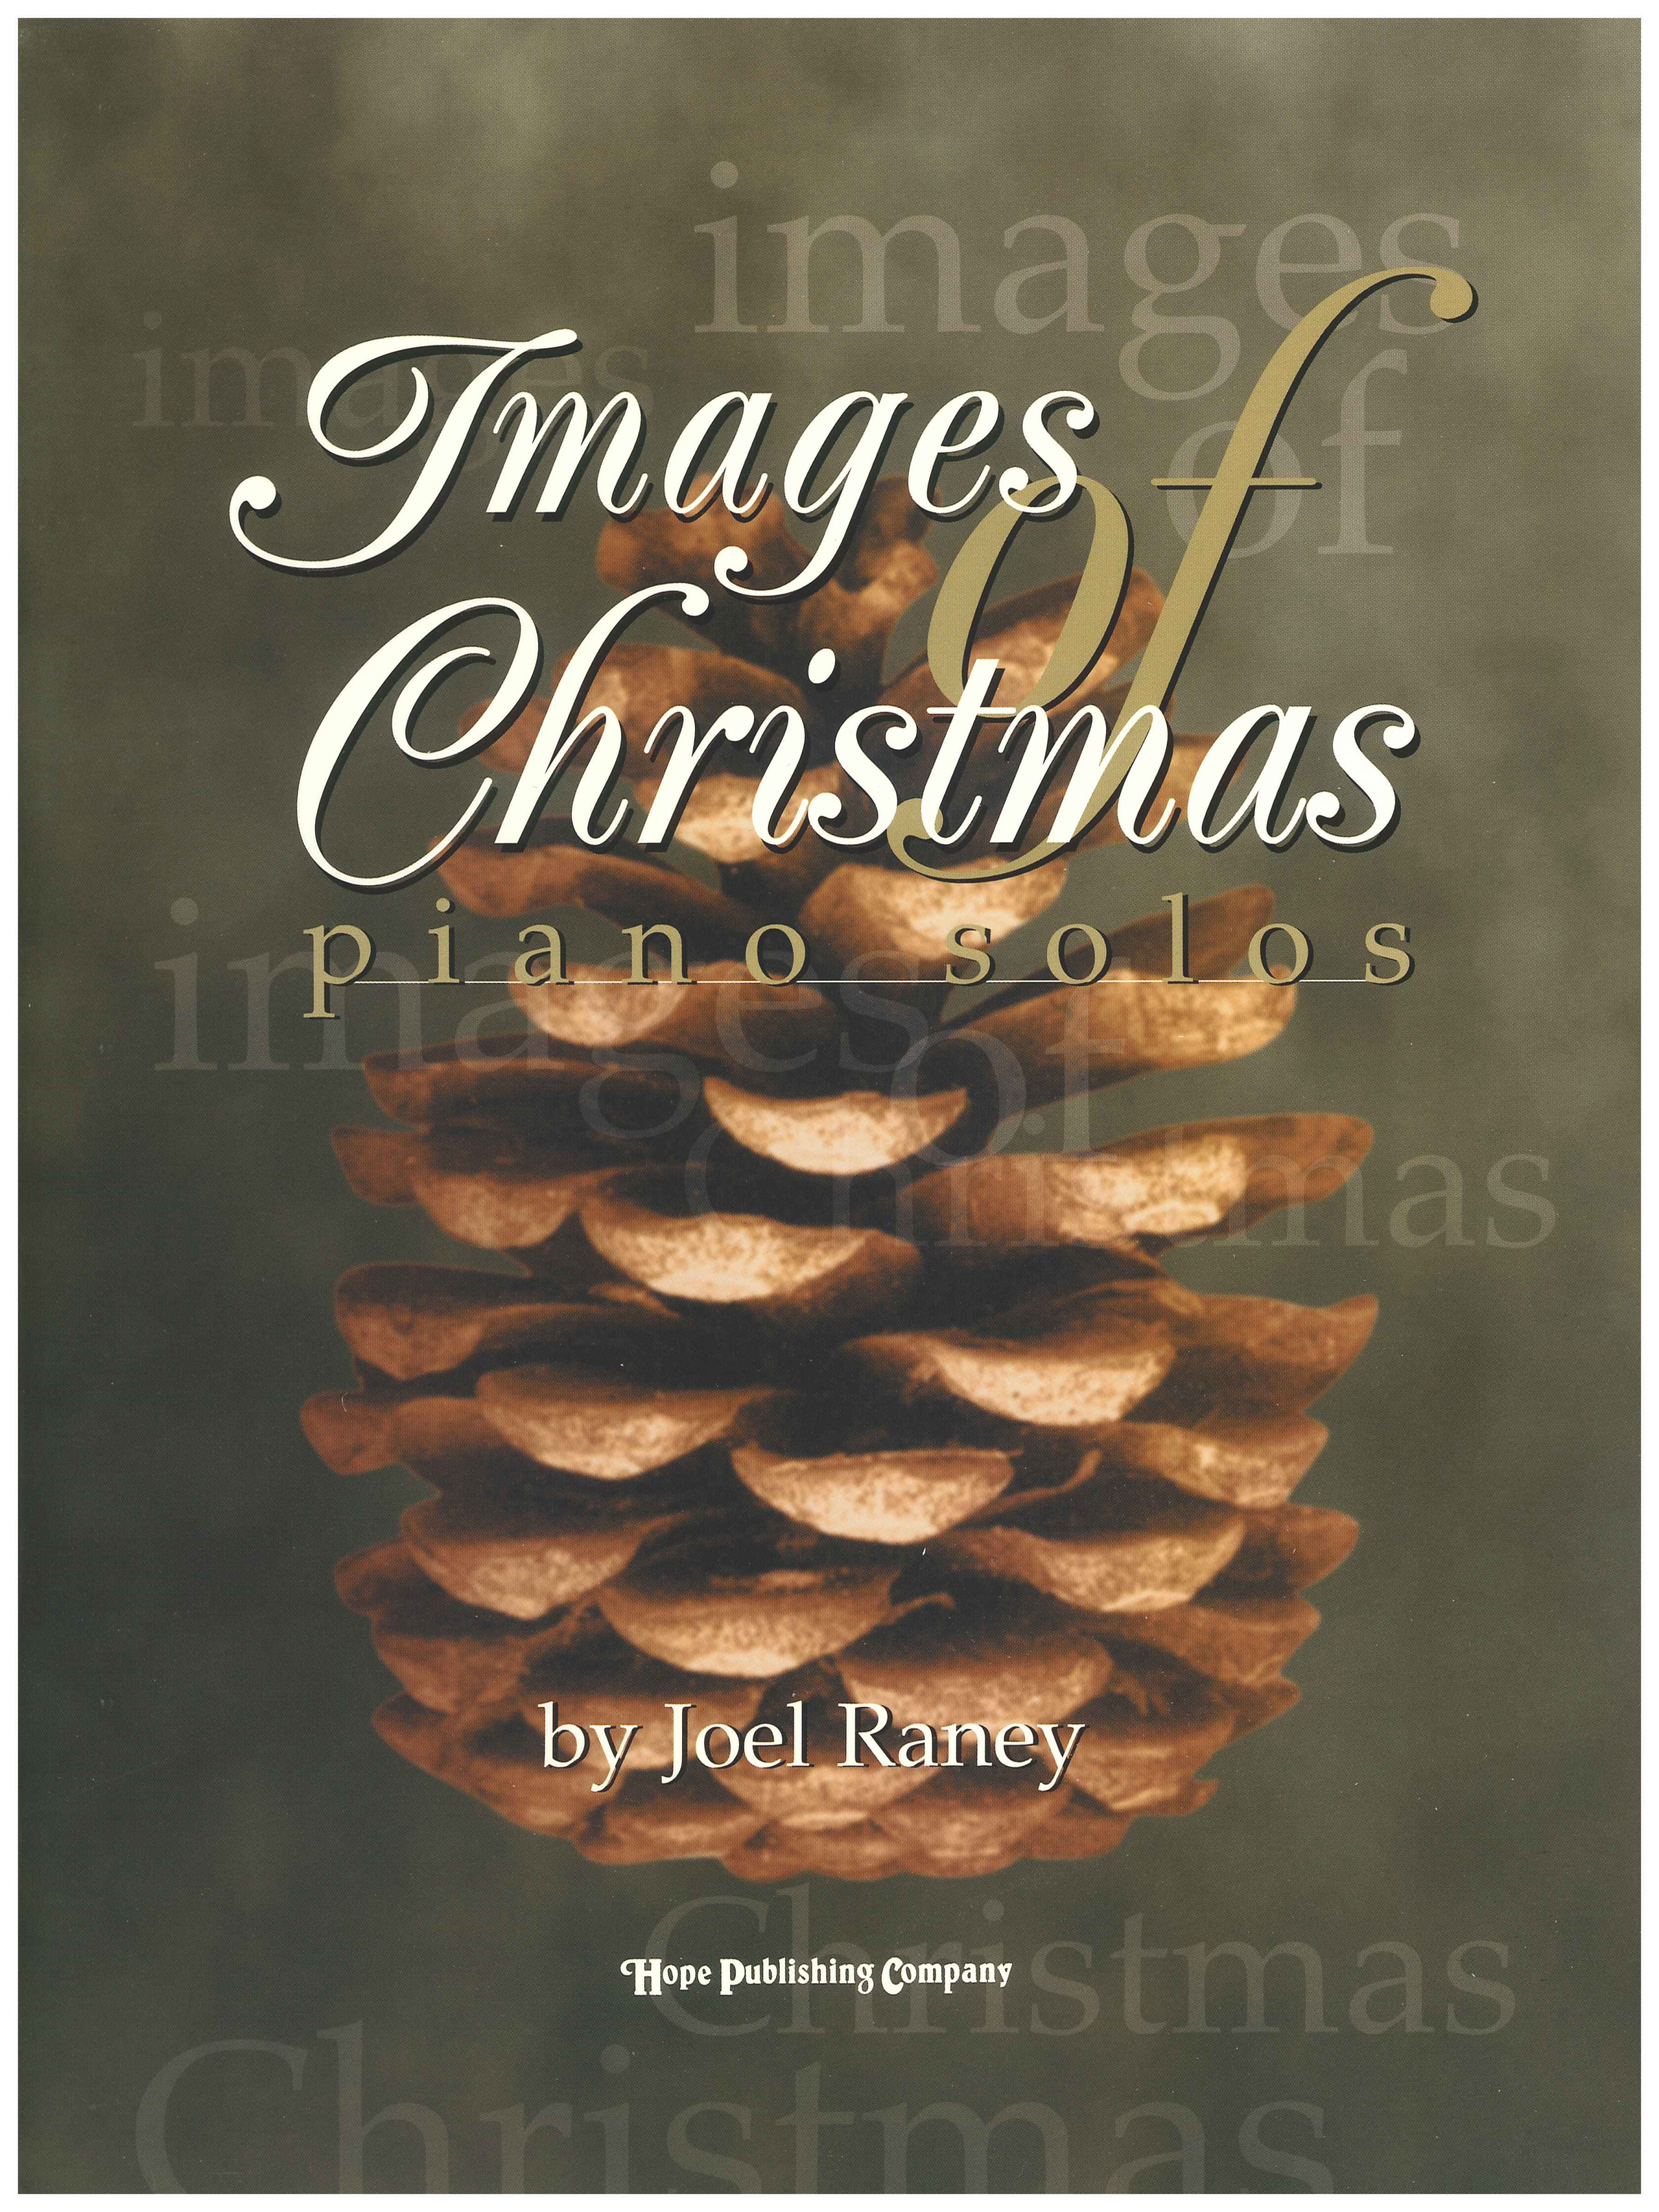 Images of Christmas - Piano Solos Cover Image